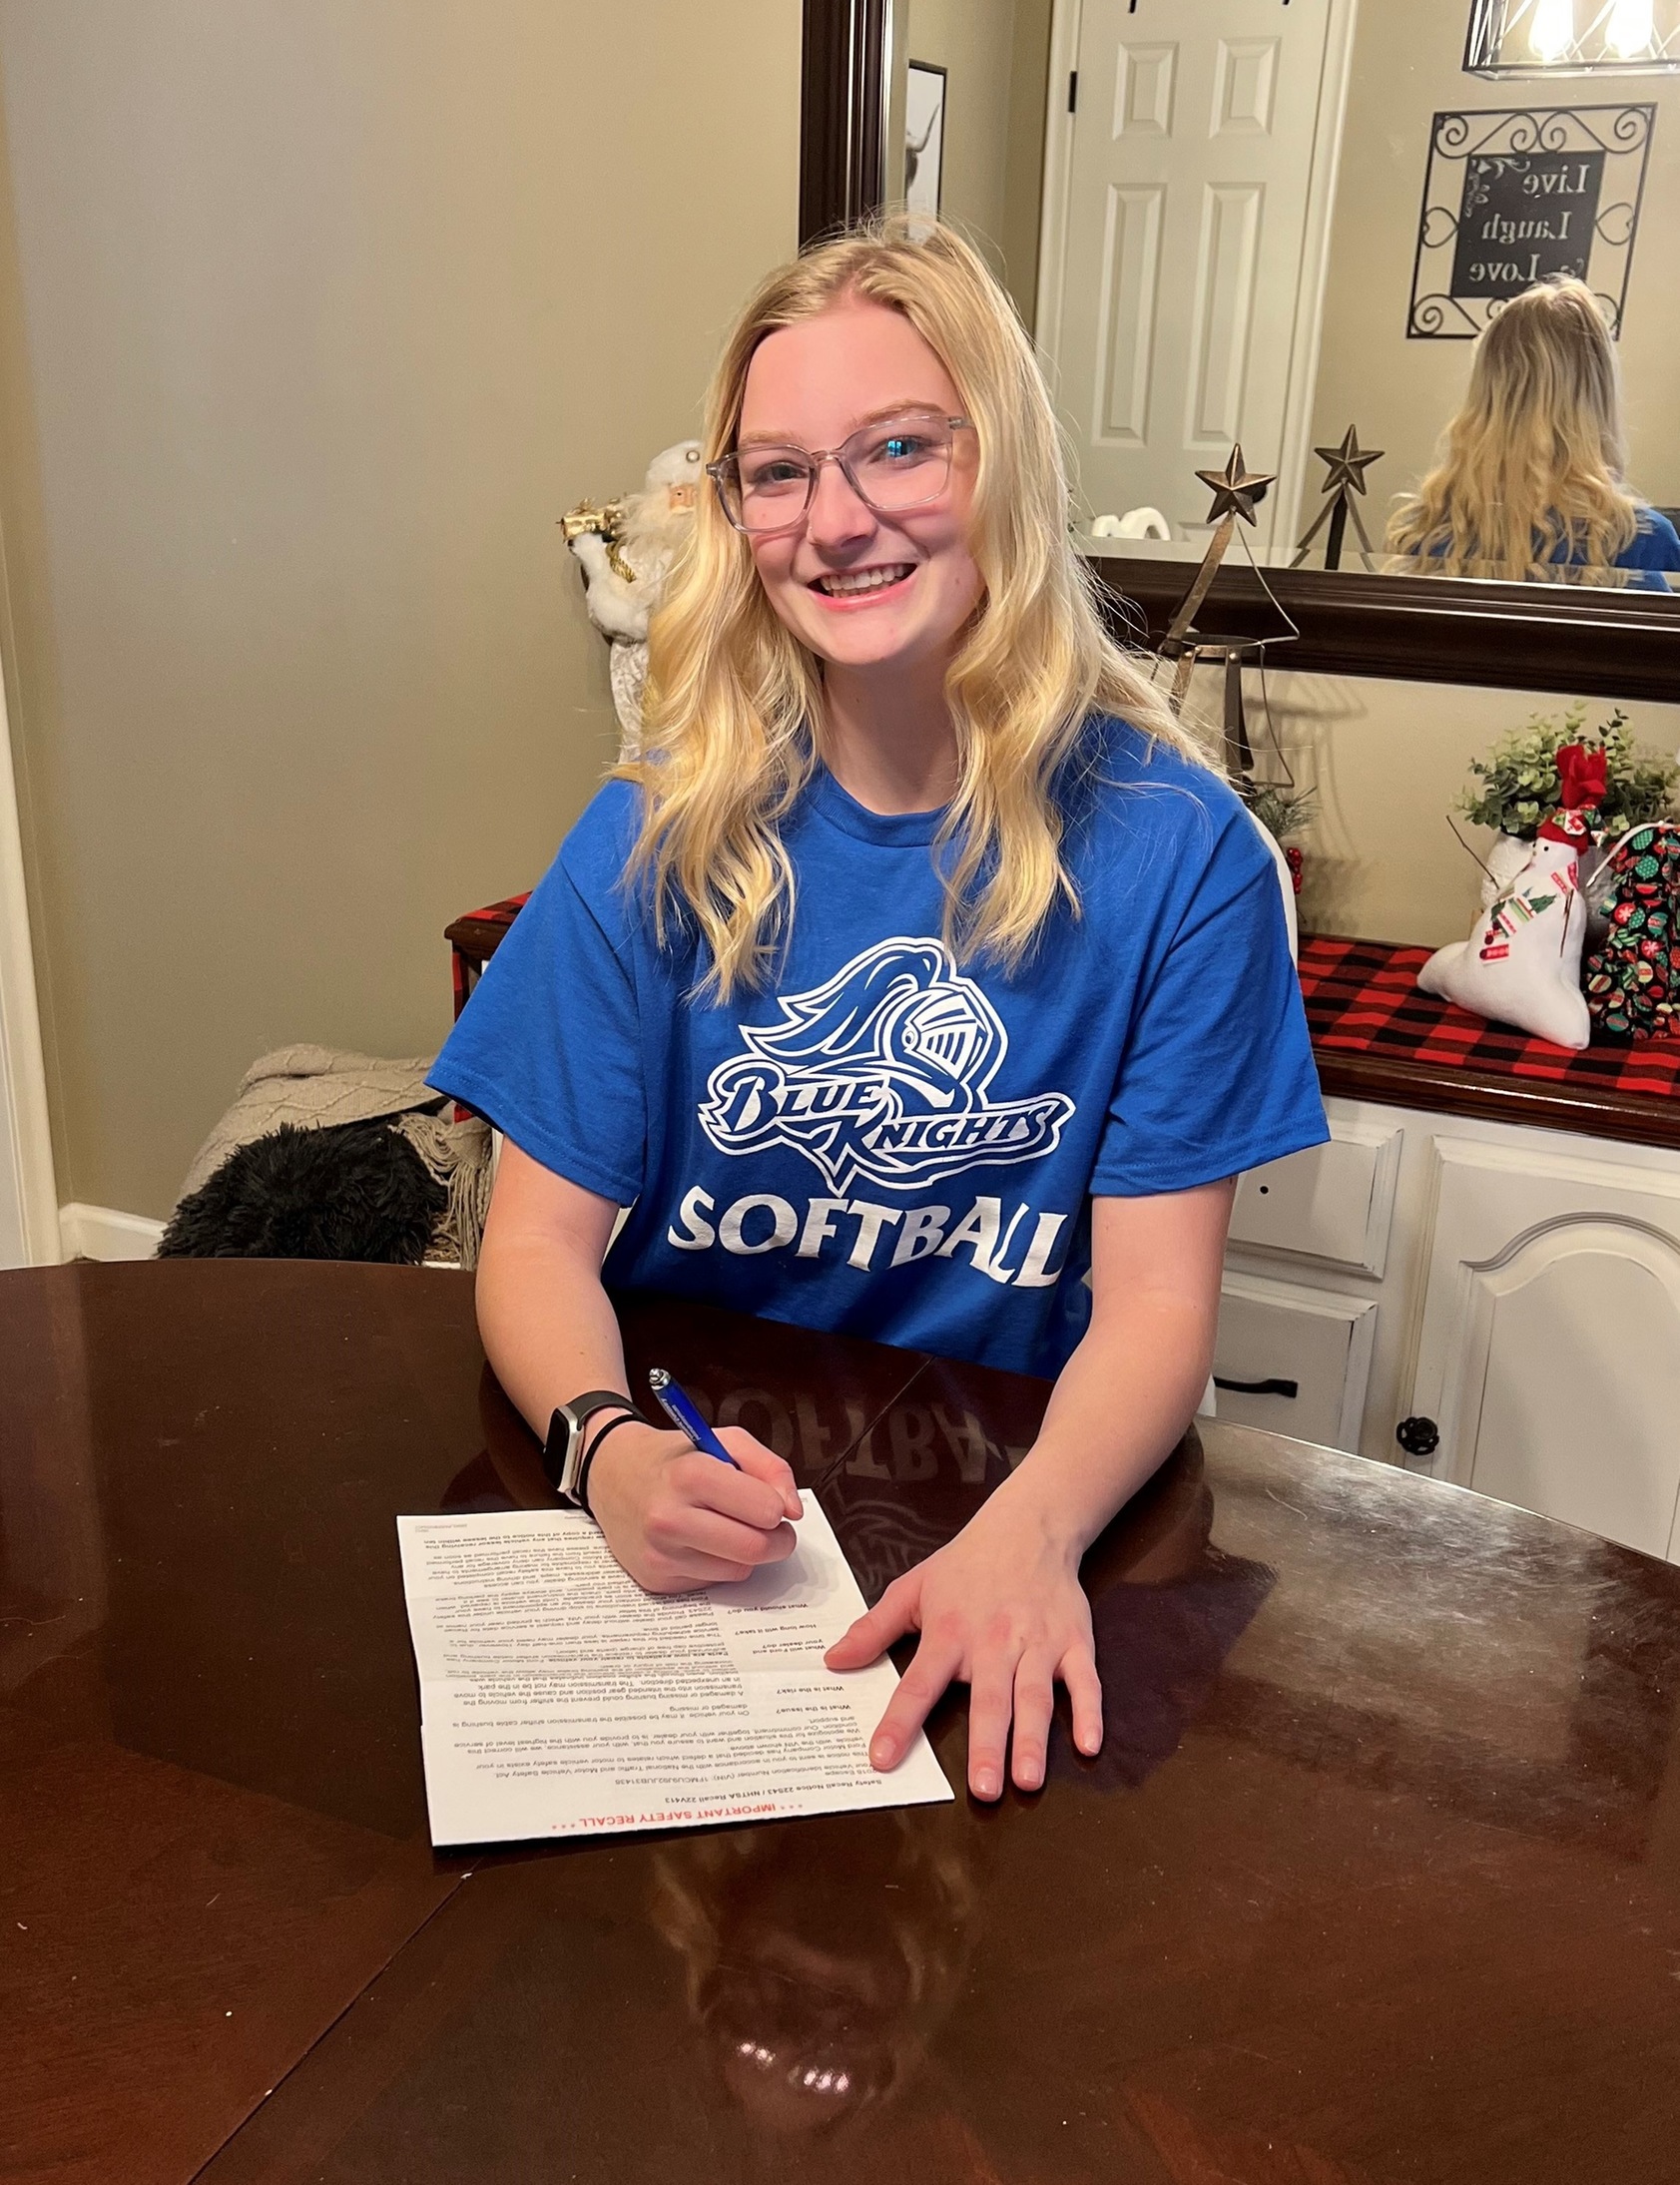 McDANIELS SiGNS LETTER OF INTENT FOR BLUE KNIGHTS SOFTBALL